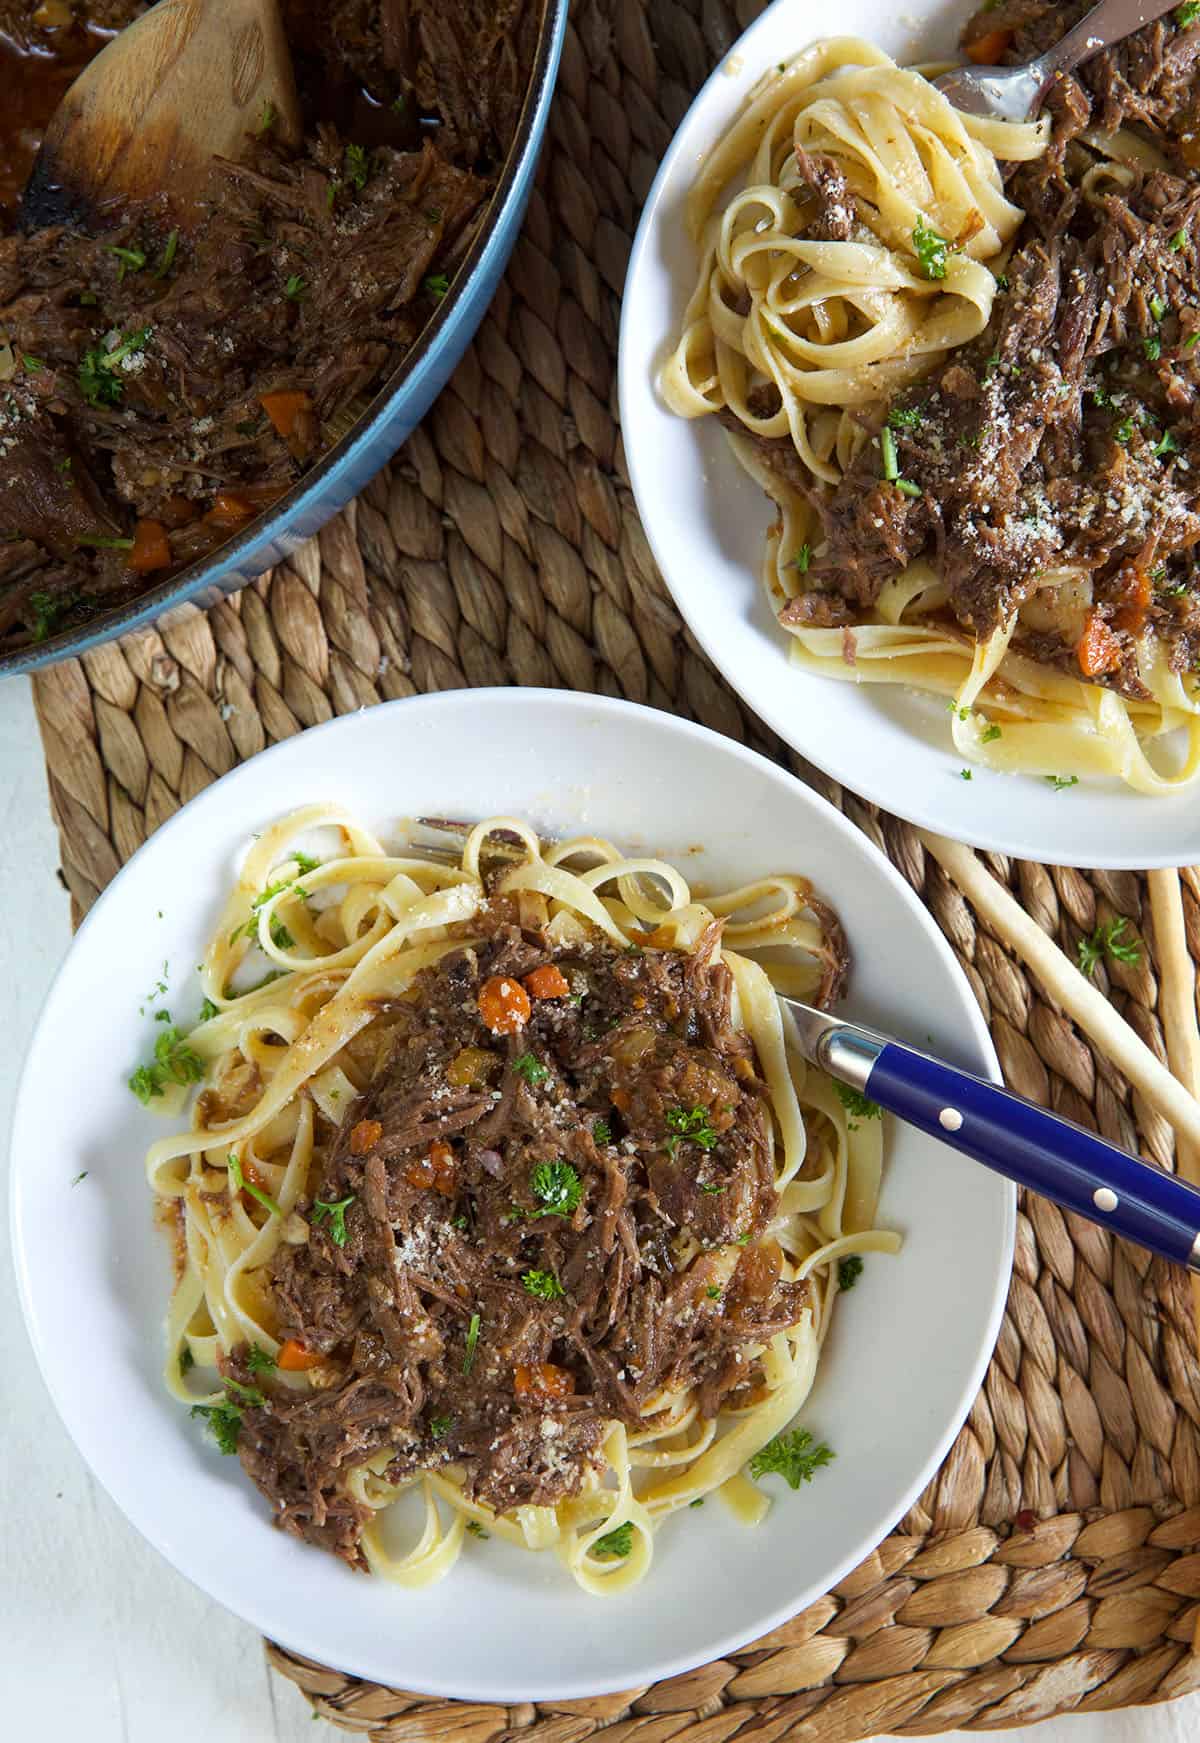 Two bowls of pasta and short rib ragu are placed on a brown place mat.